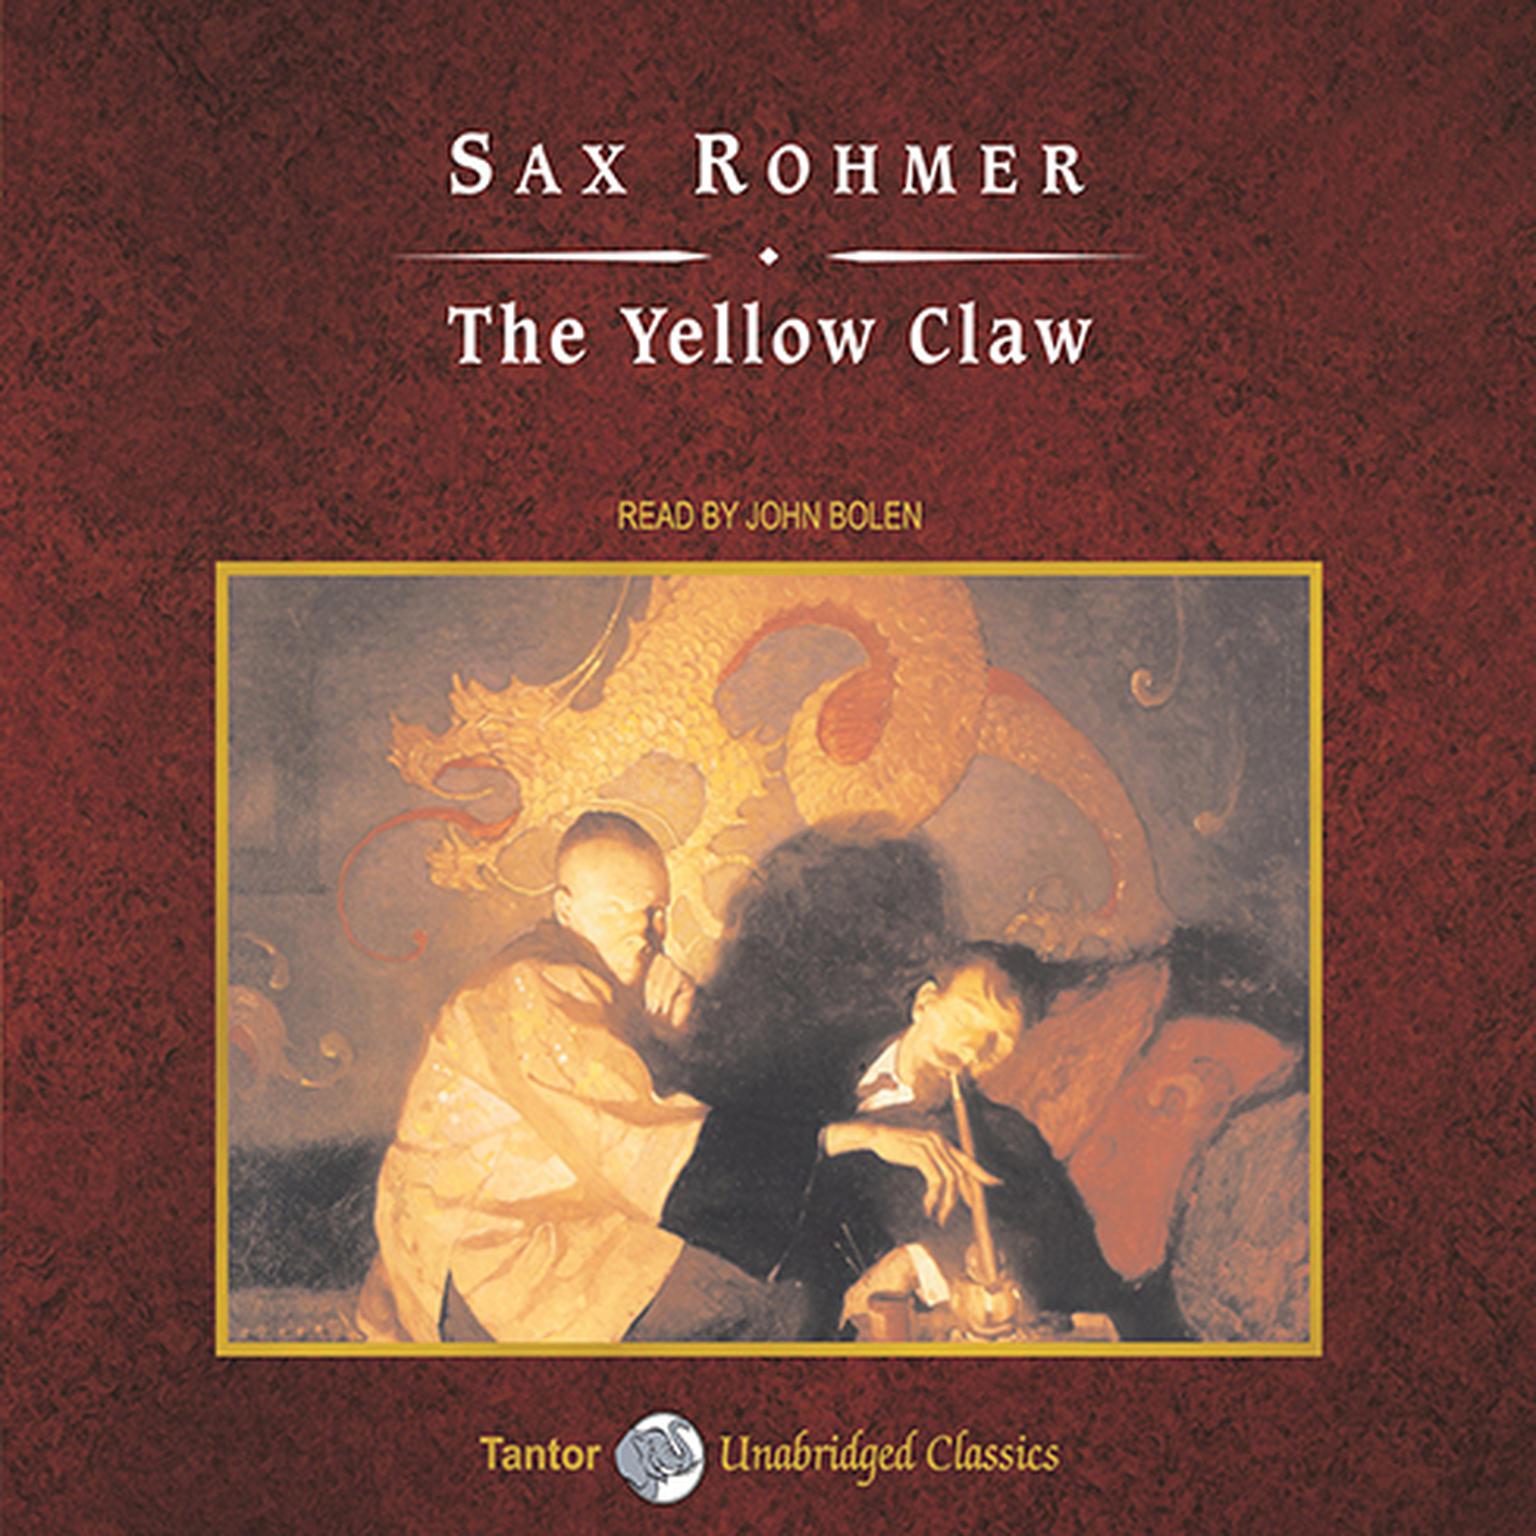 The Yellow Claw, with eBook Audiobook, by Sax Rohmer